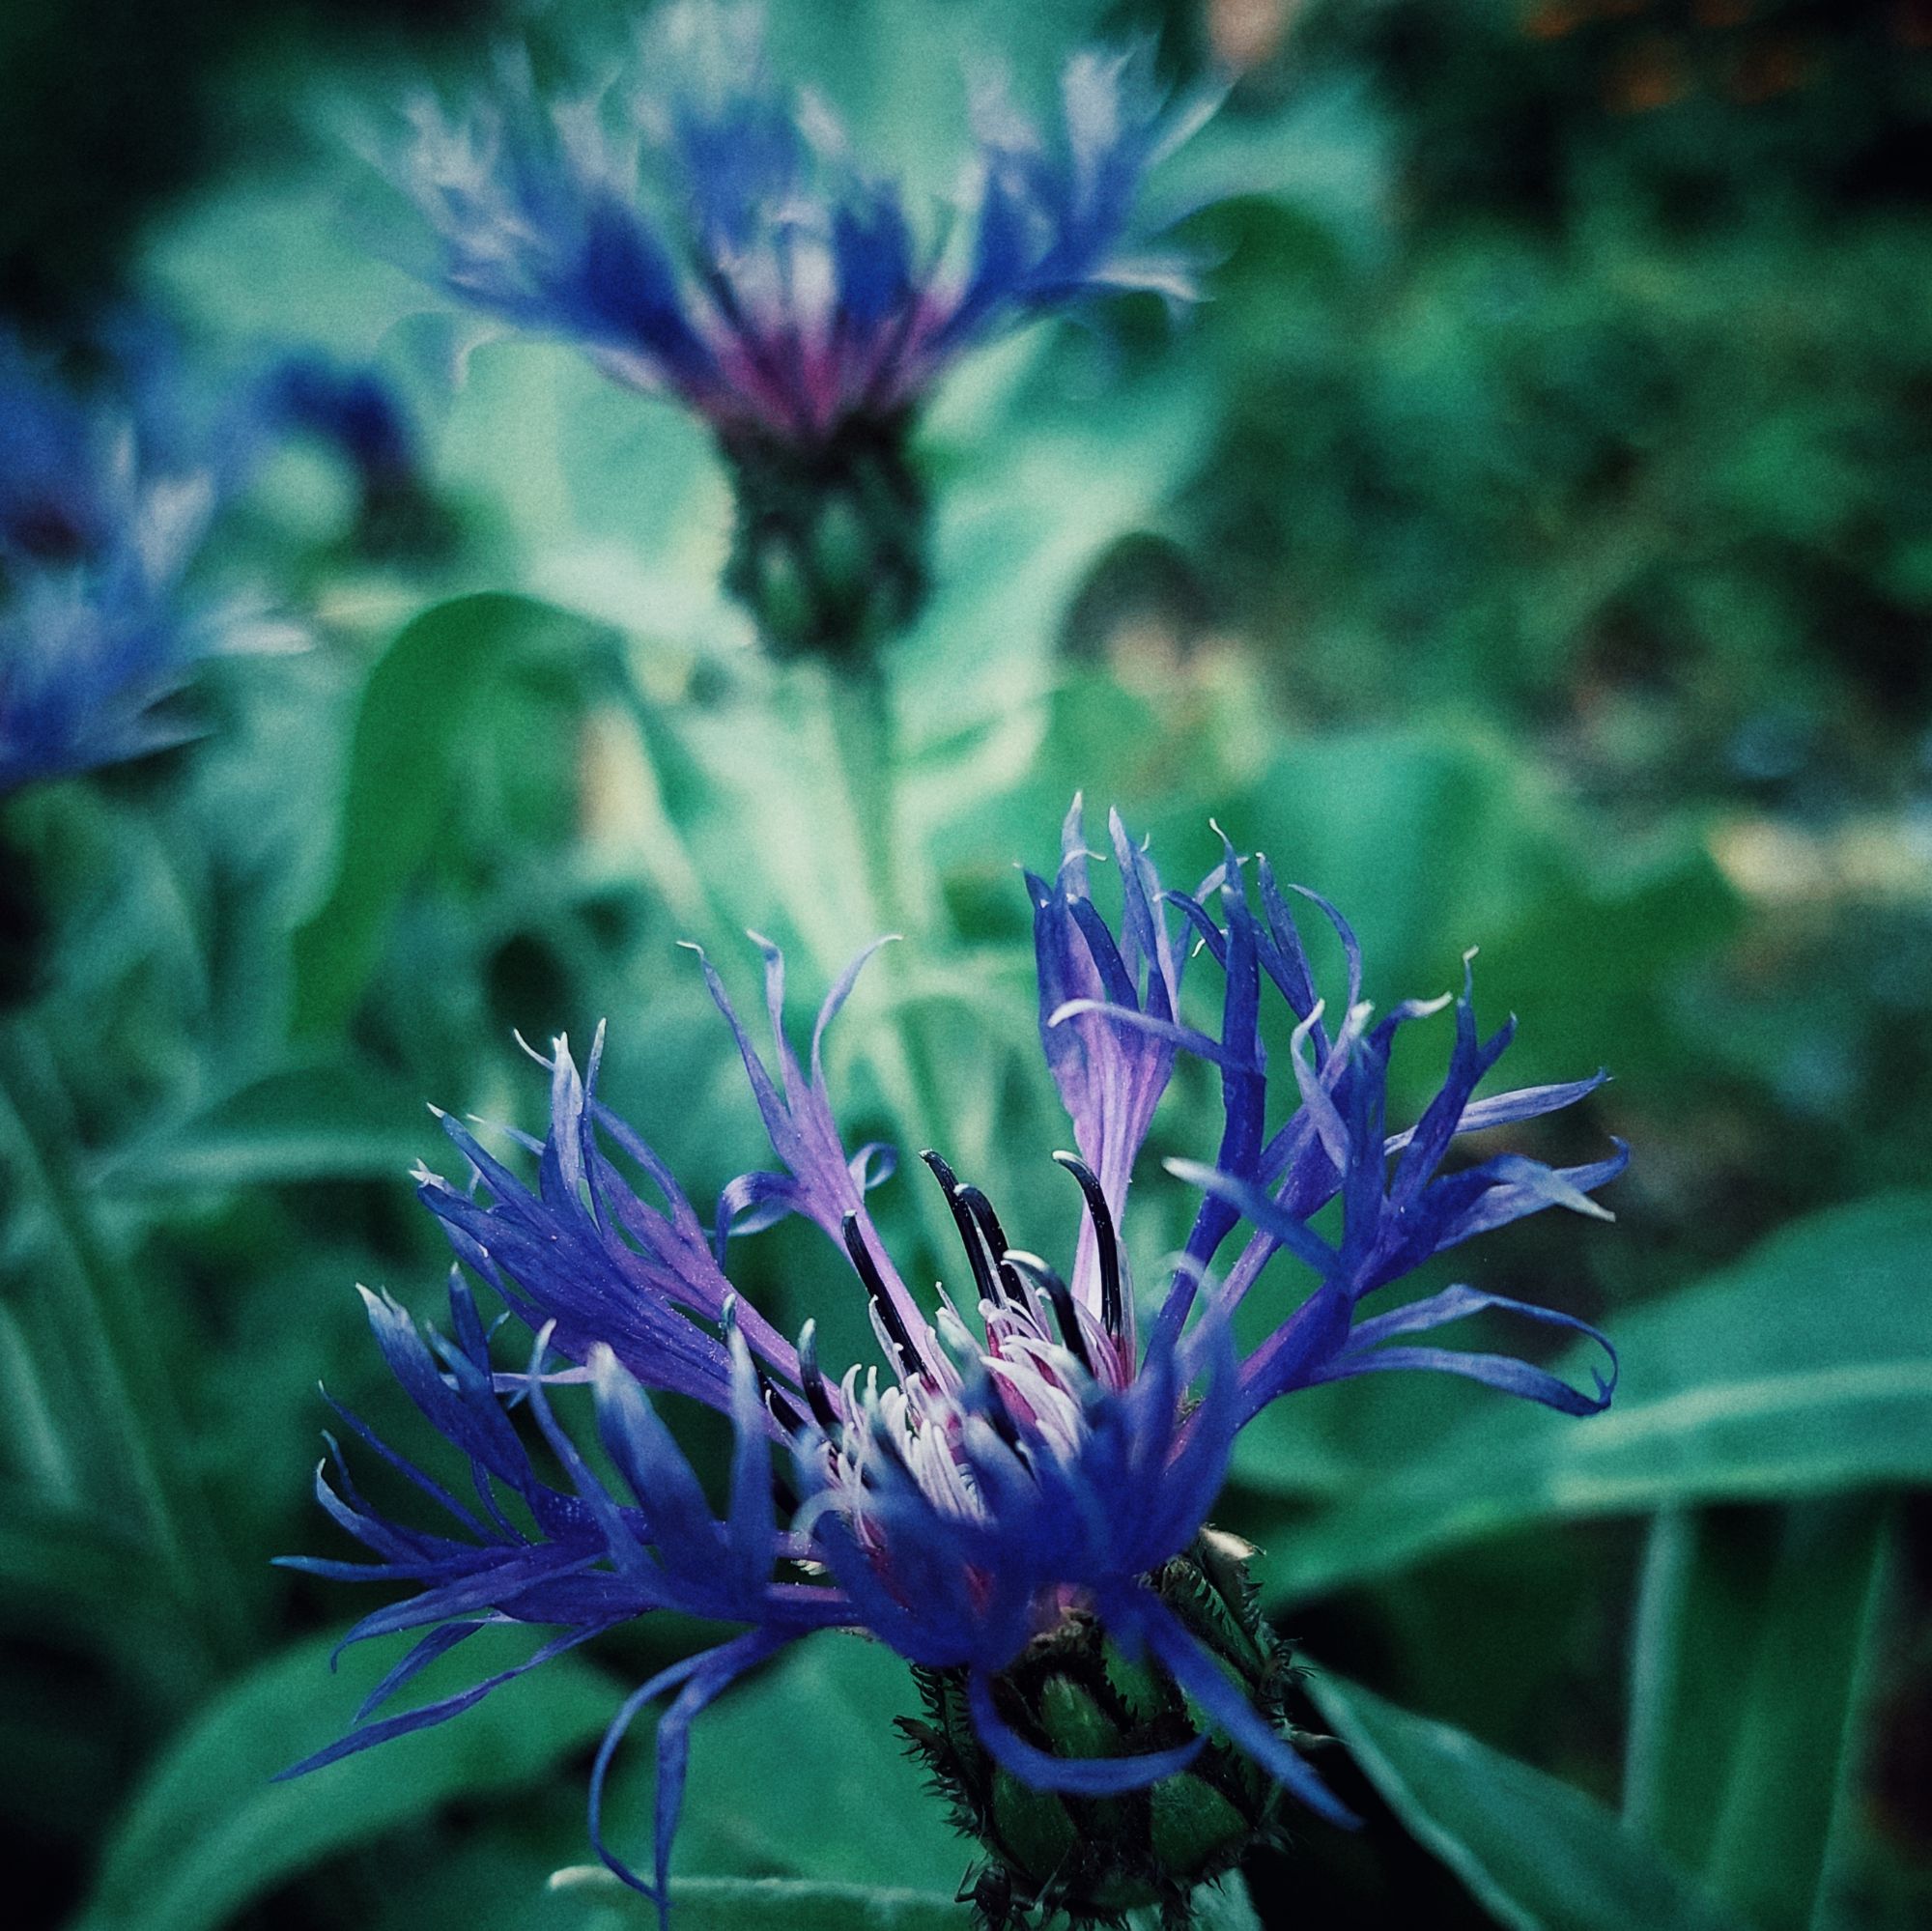 Blue flowers in a dense green environment.